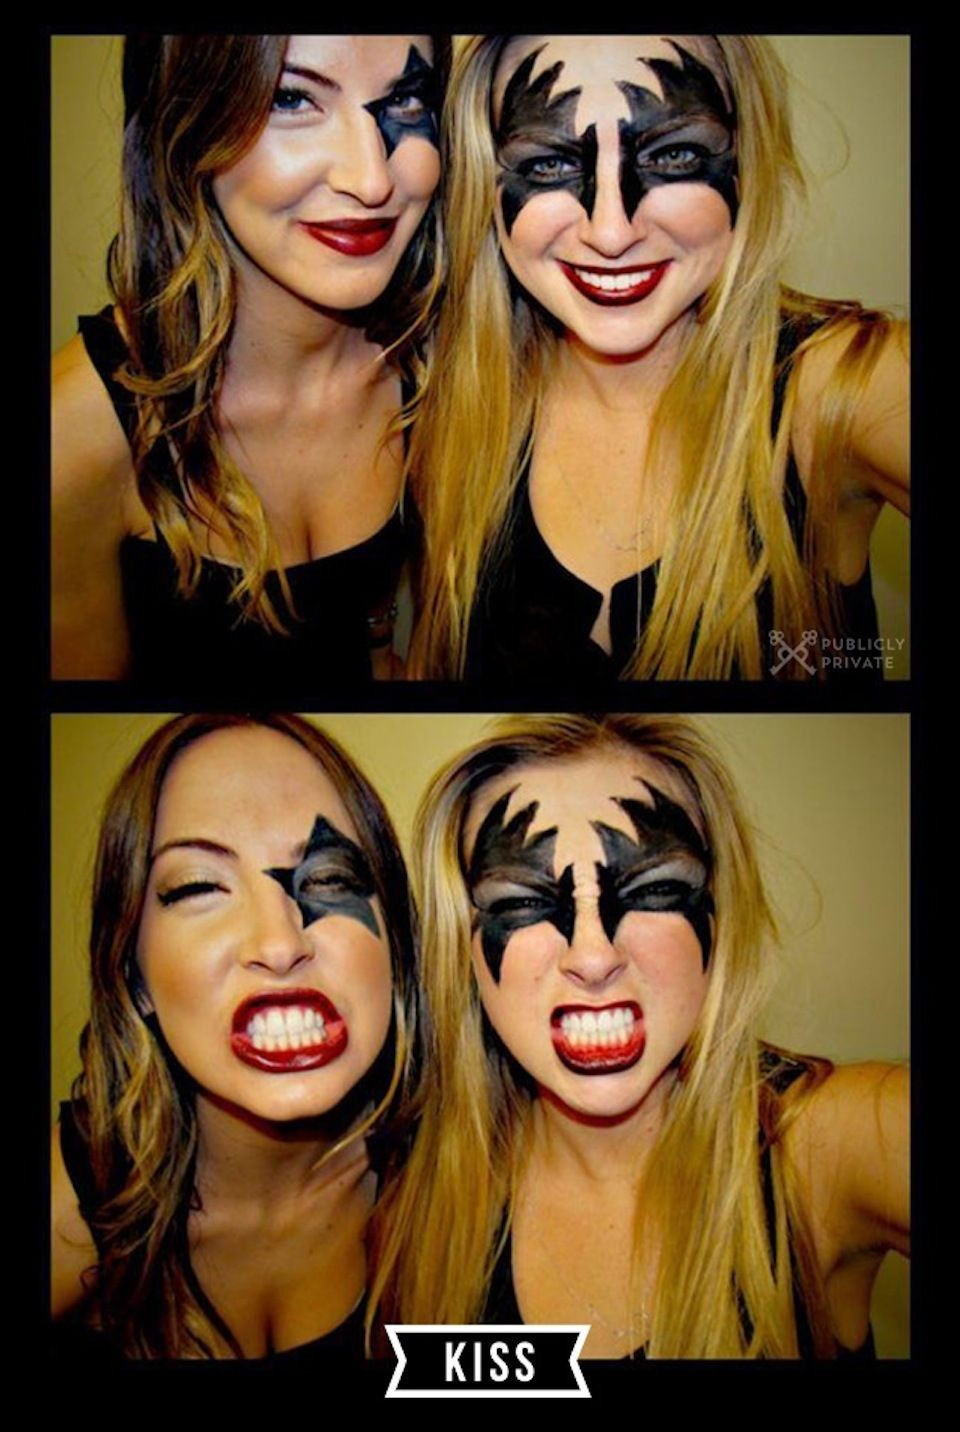 DIY Kiss Costumes
 Best Halloween Costumes All About the Makeup